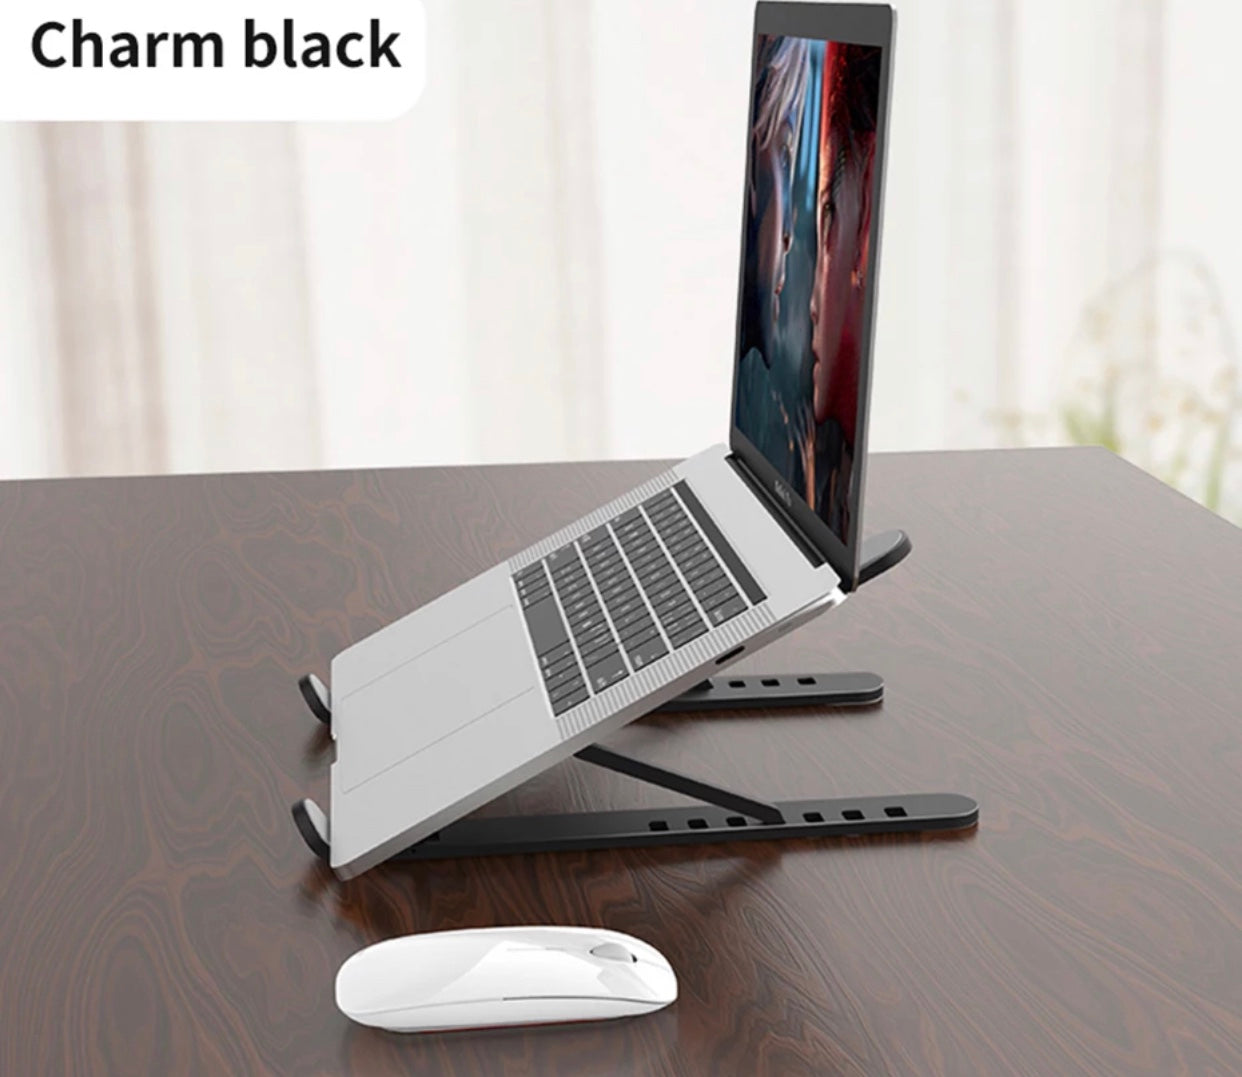 Laptop Stand- 3 colors - Supports Up to 17-inch Screen, Six Level Adjustment, Foldable and Portable! Black color option. Black.